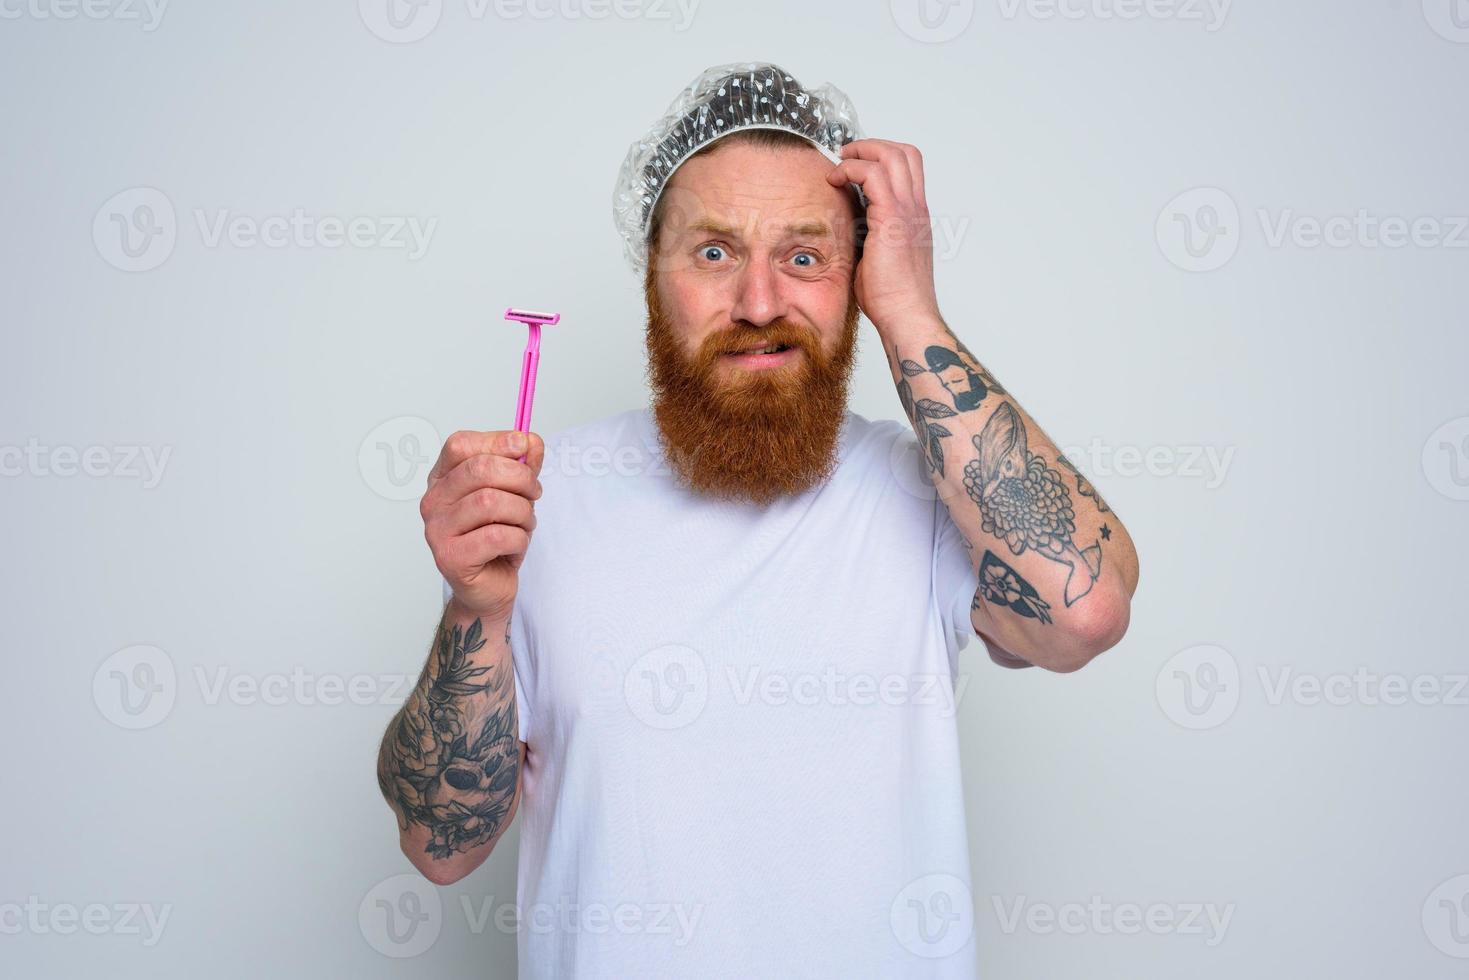 confused man wants to adjust the beard with a razor blade photo